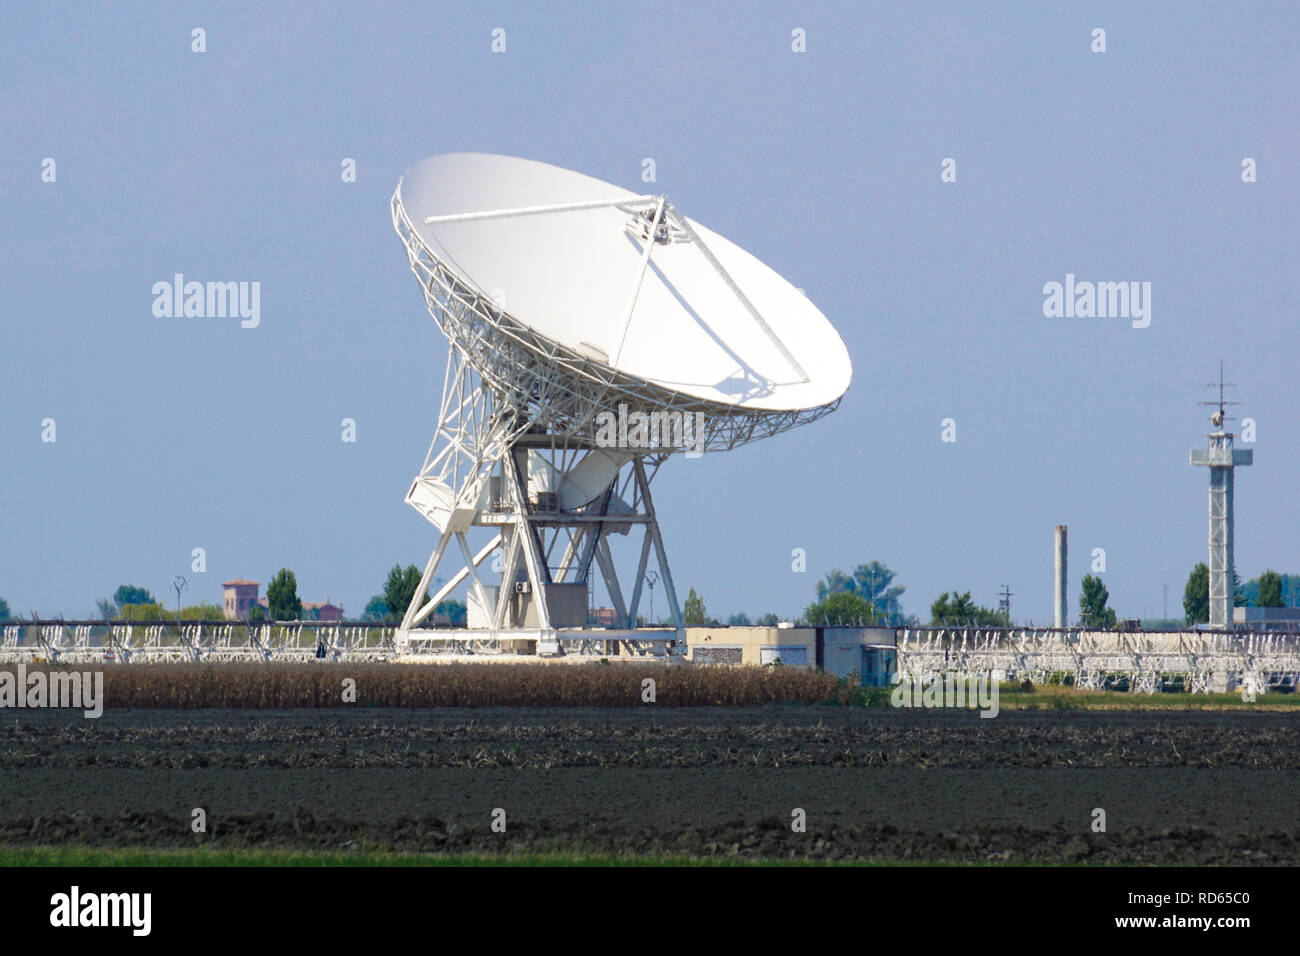 Giant radio telescopes search for extraterrestrial life. Stock Photo